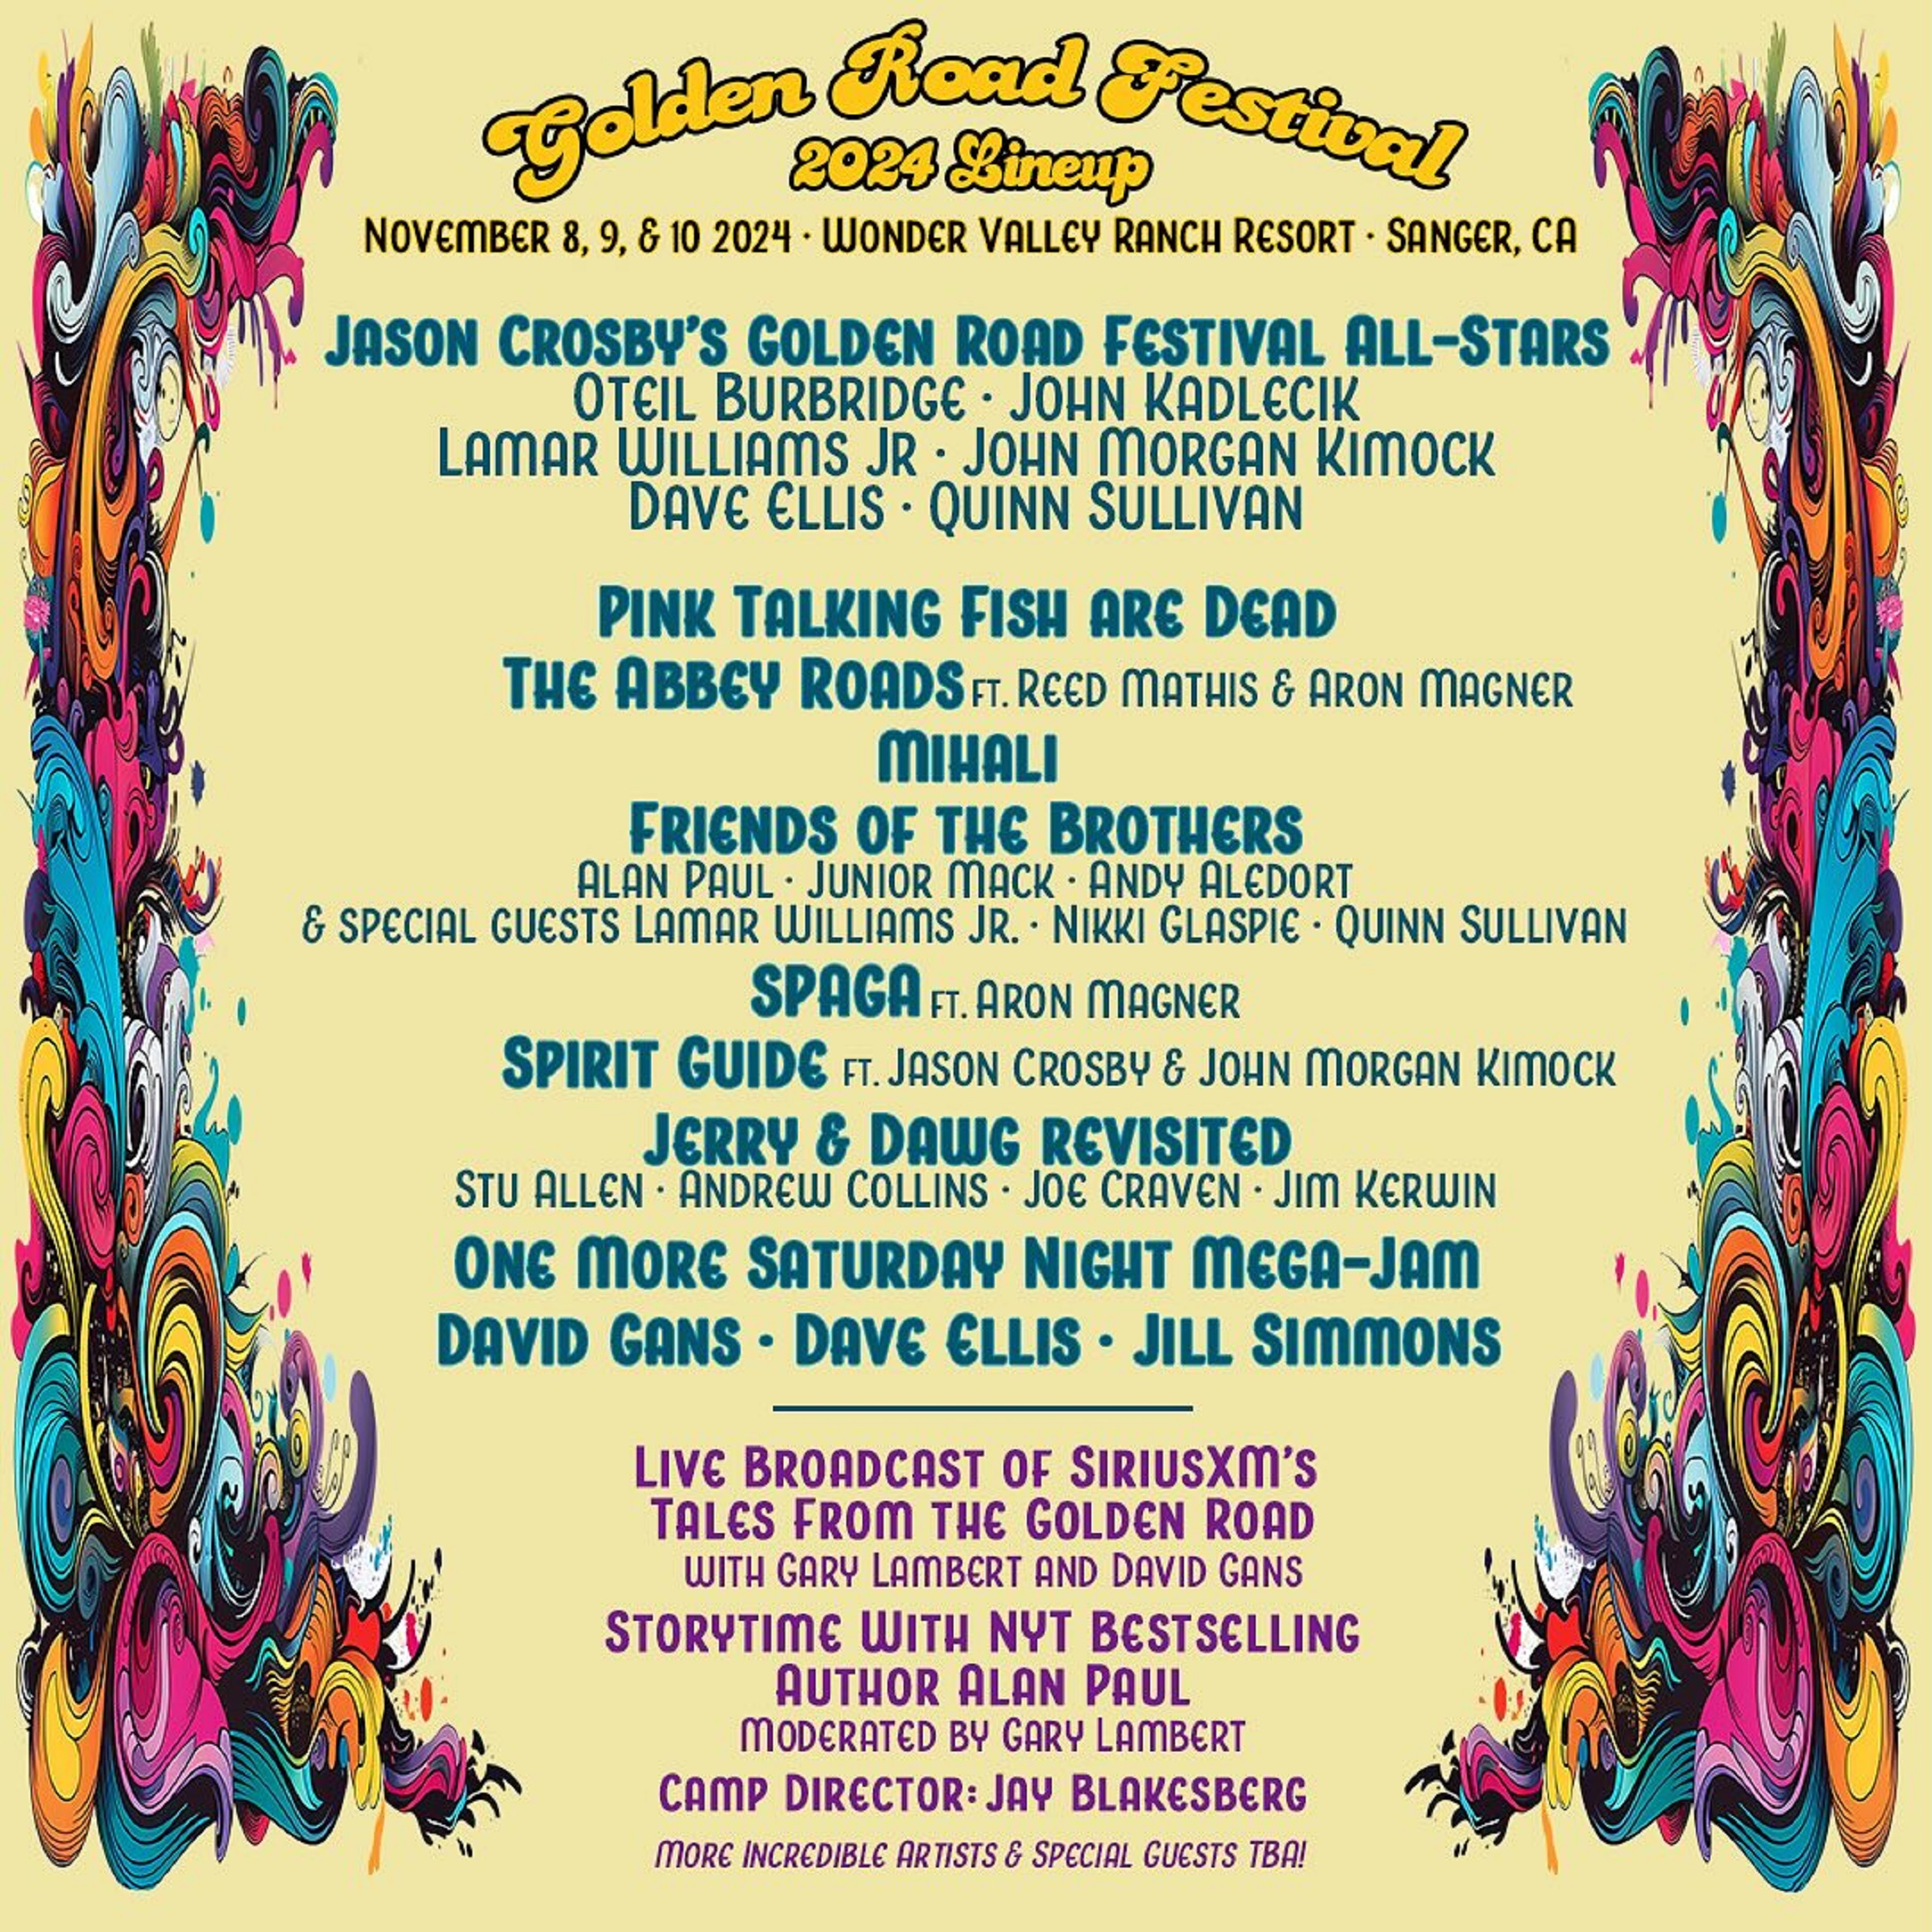 Join Jason Crosby and Amazing Artists at The Golden Road Festival!